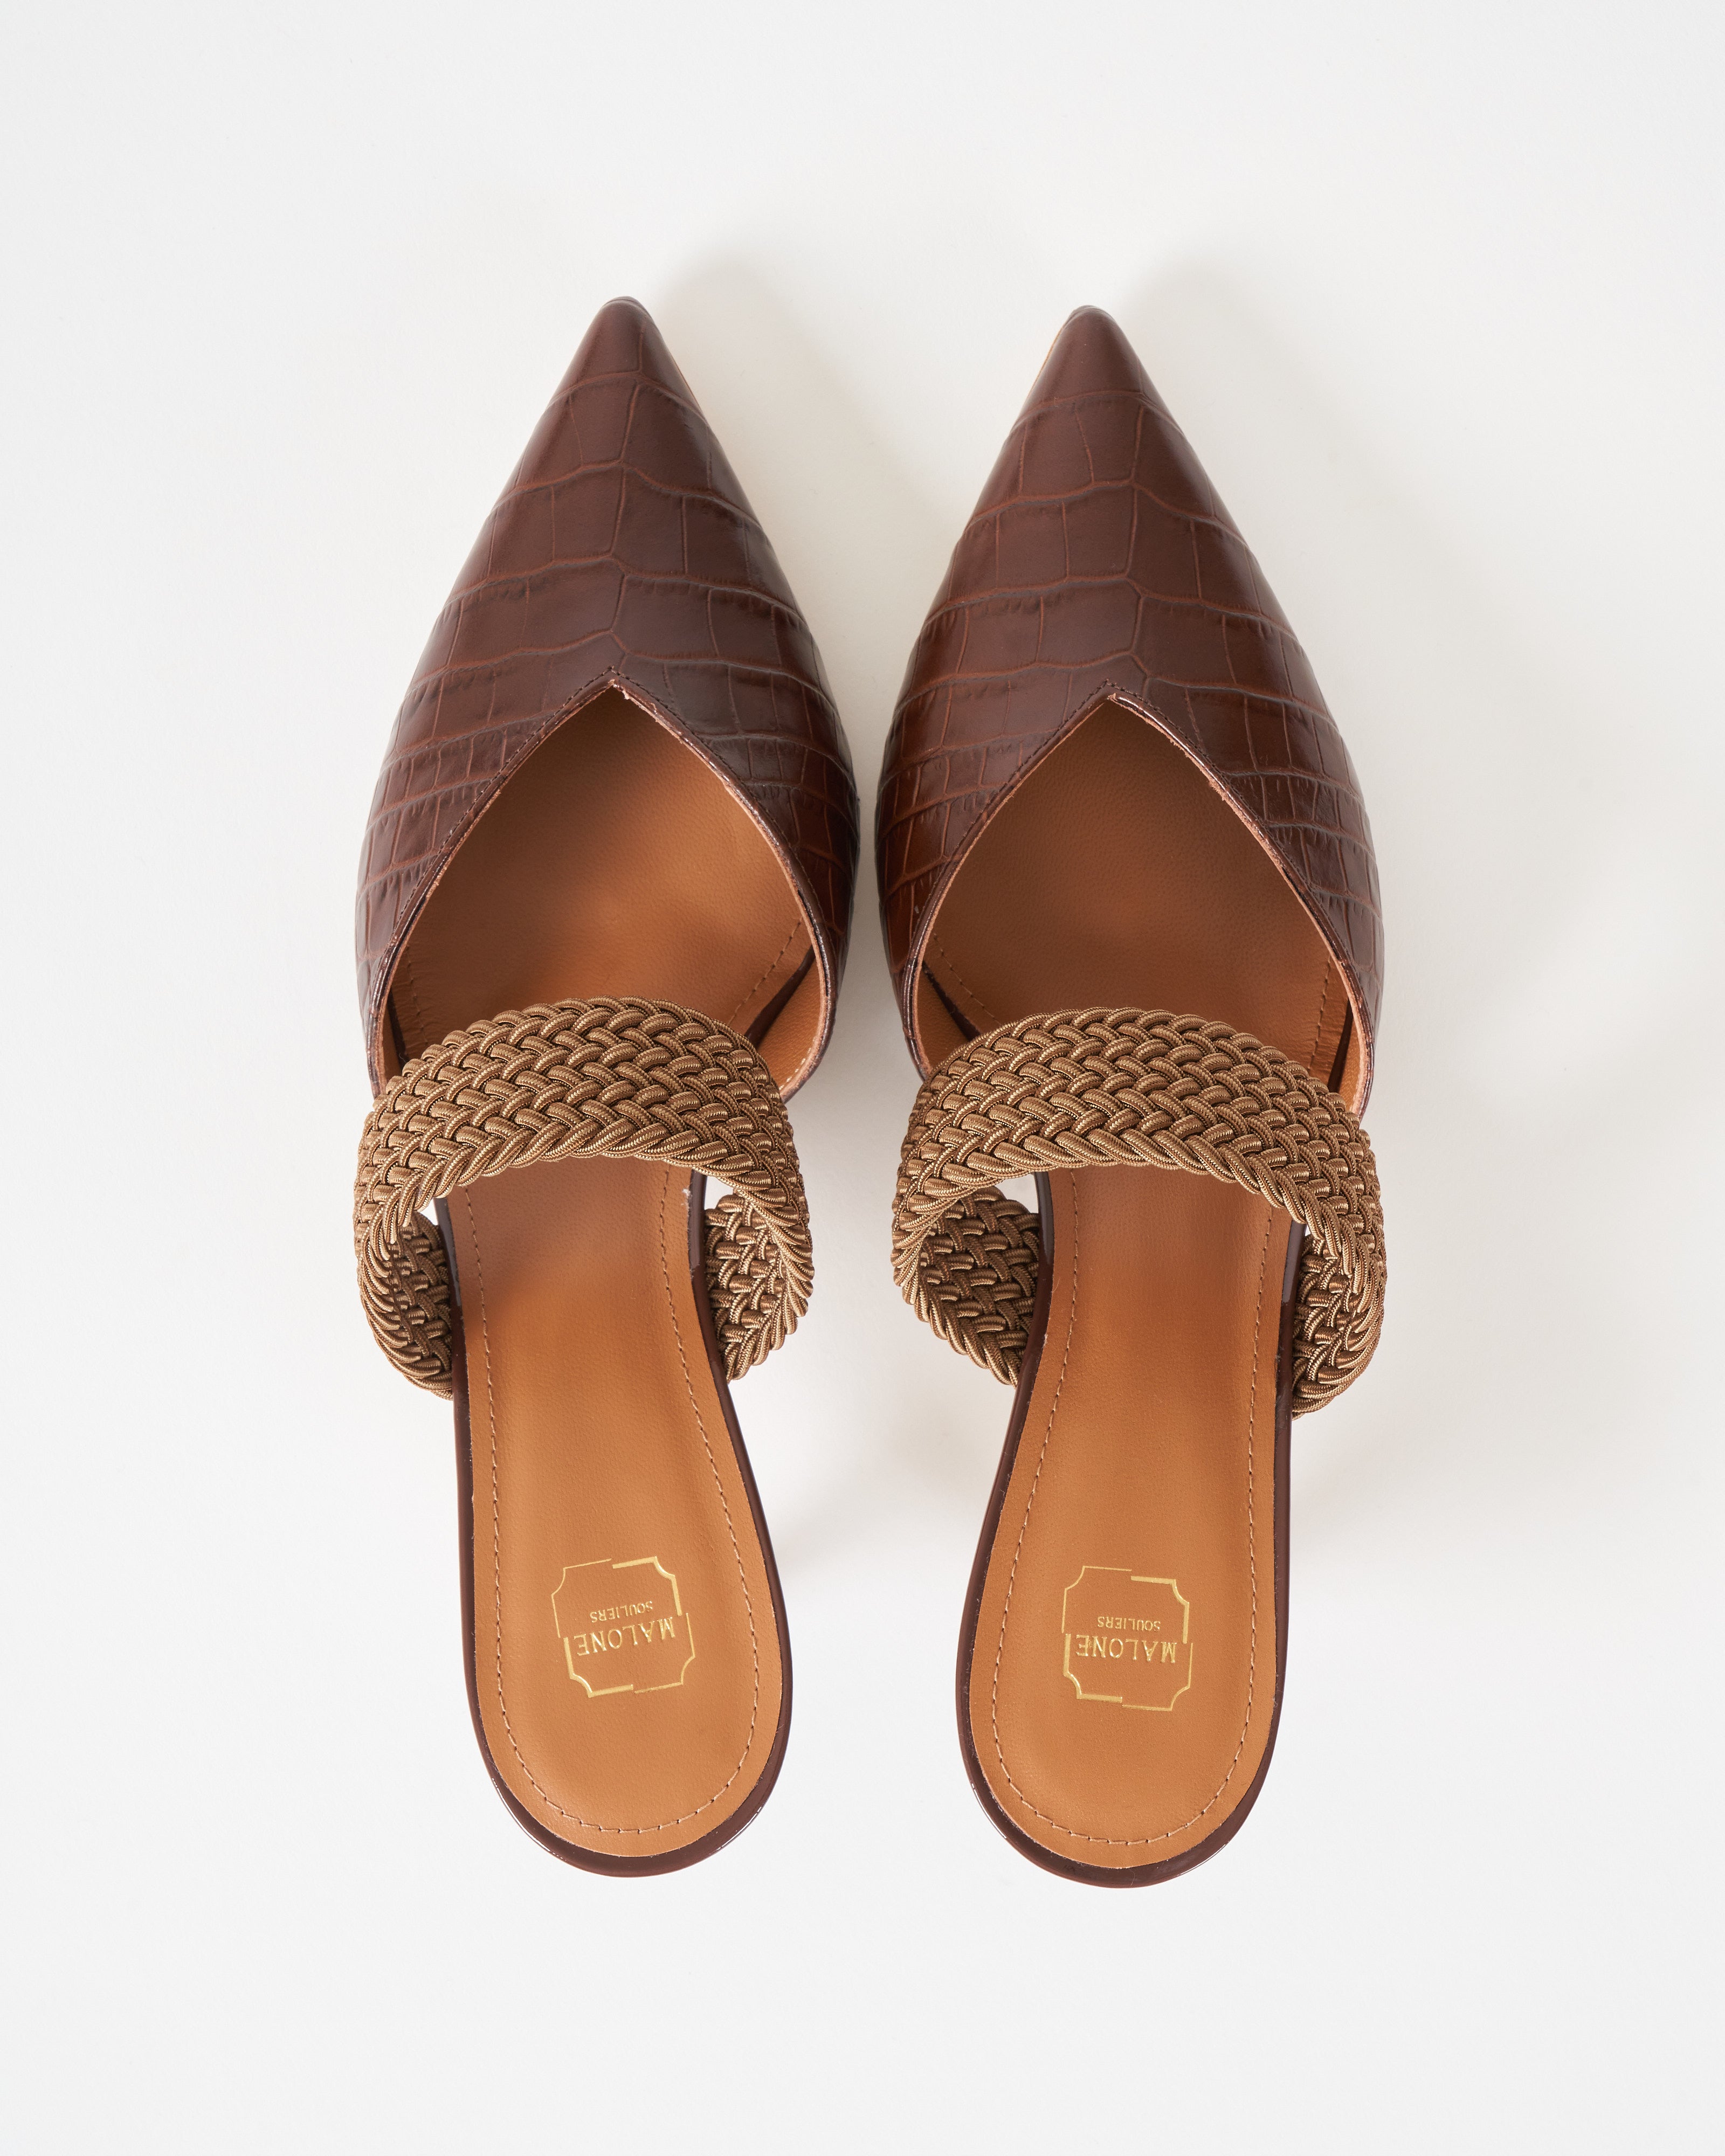 Montana 85 Taupe Embossed Leather Pumps| Malone Souliers